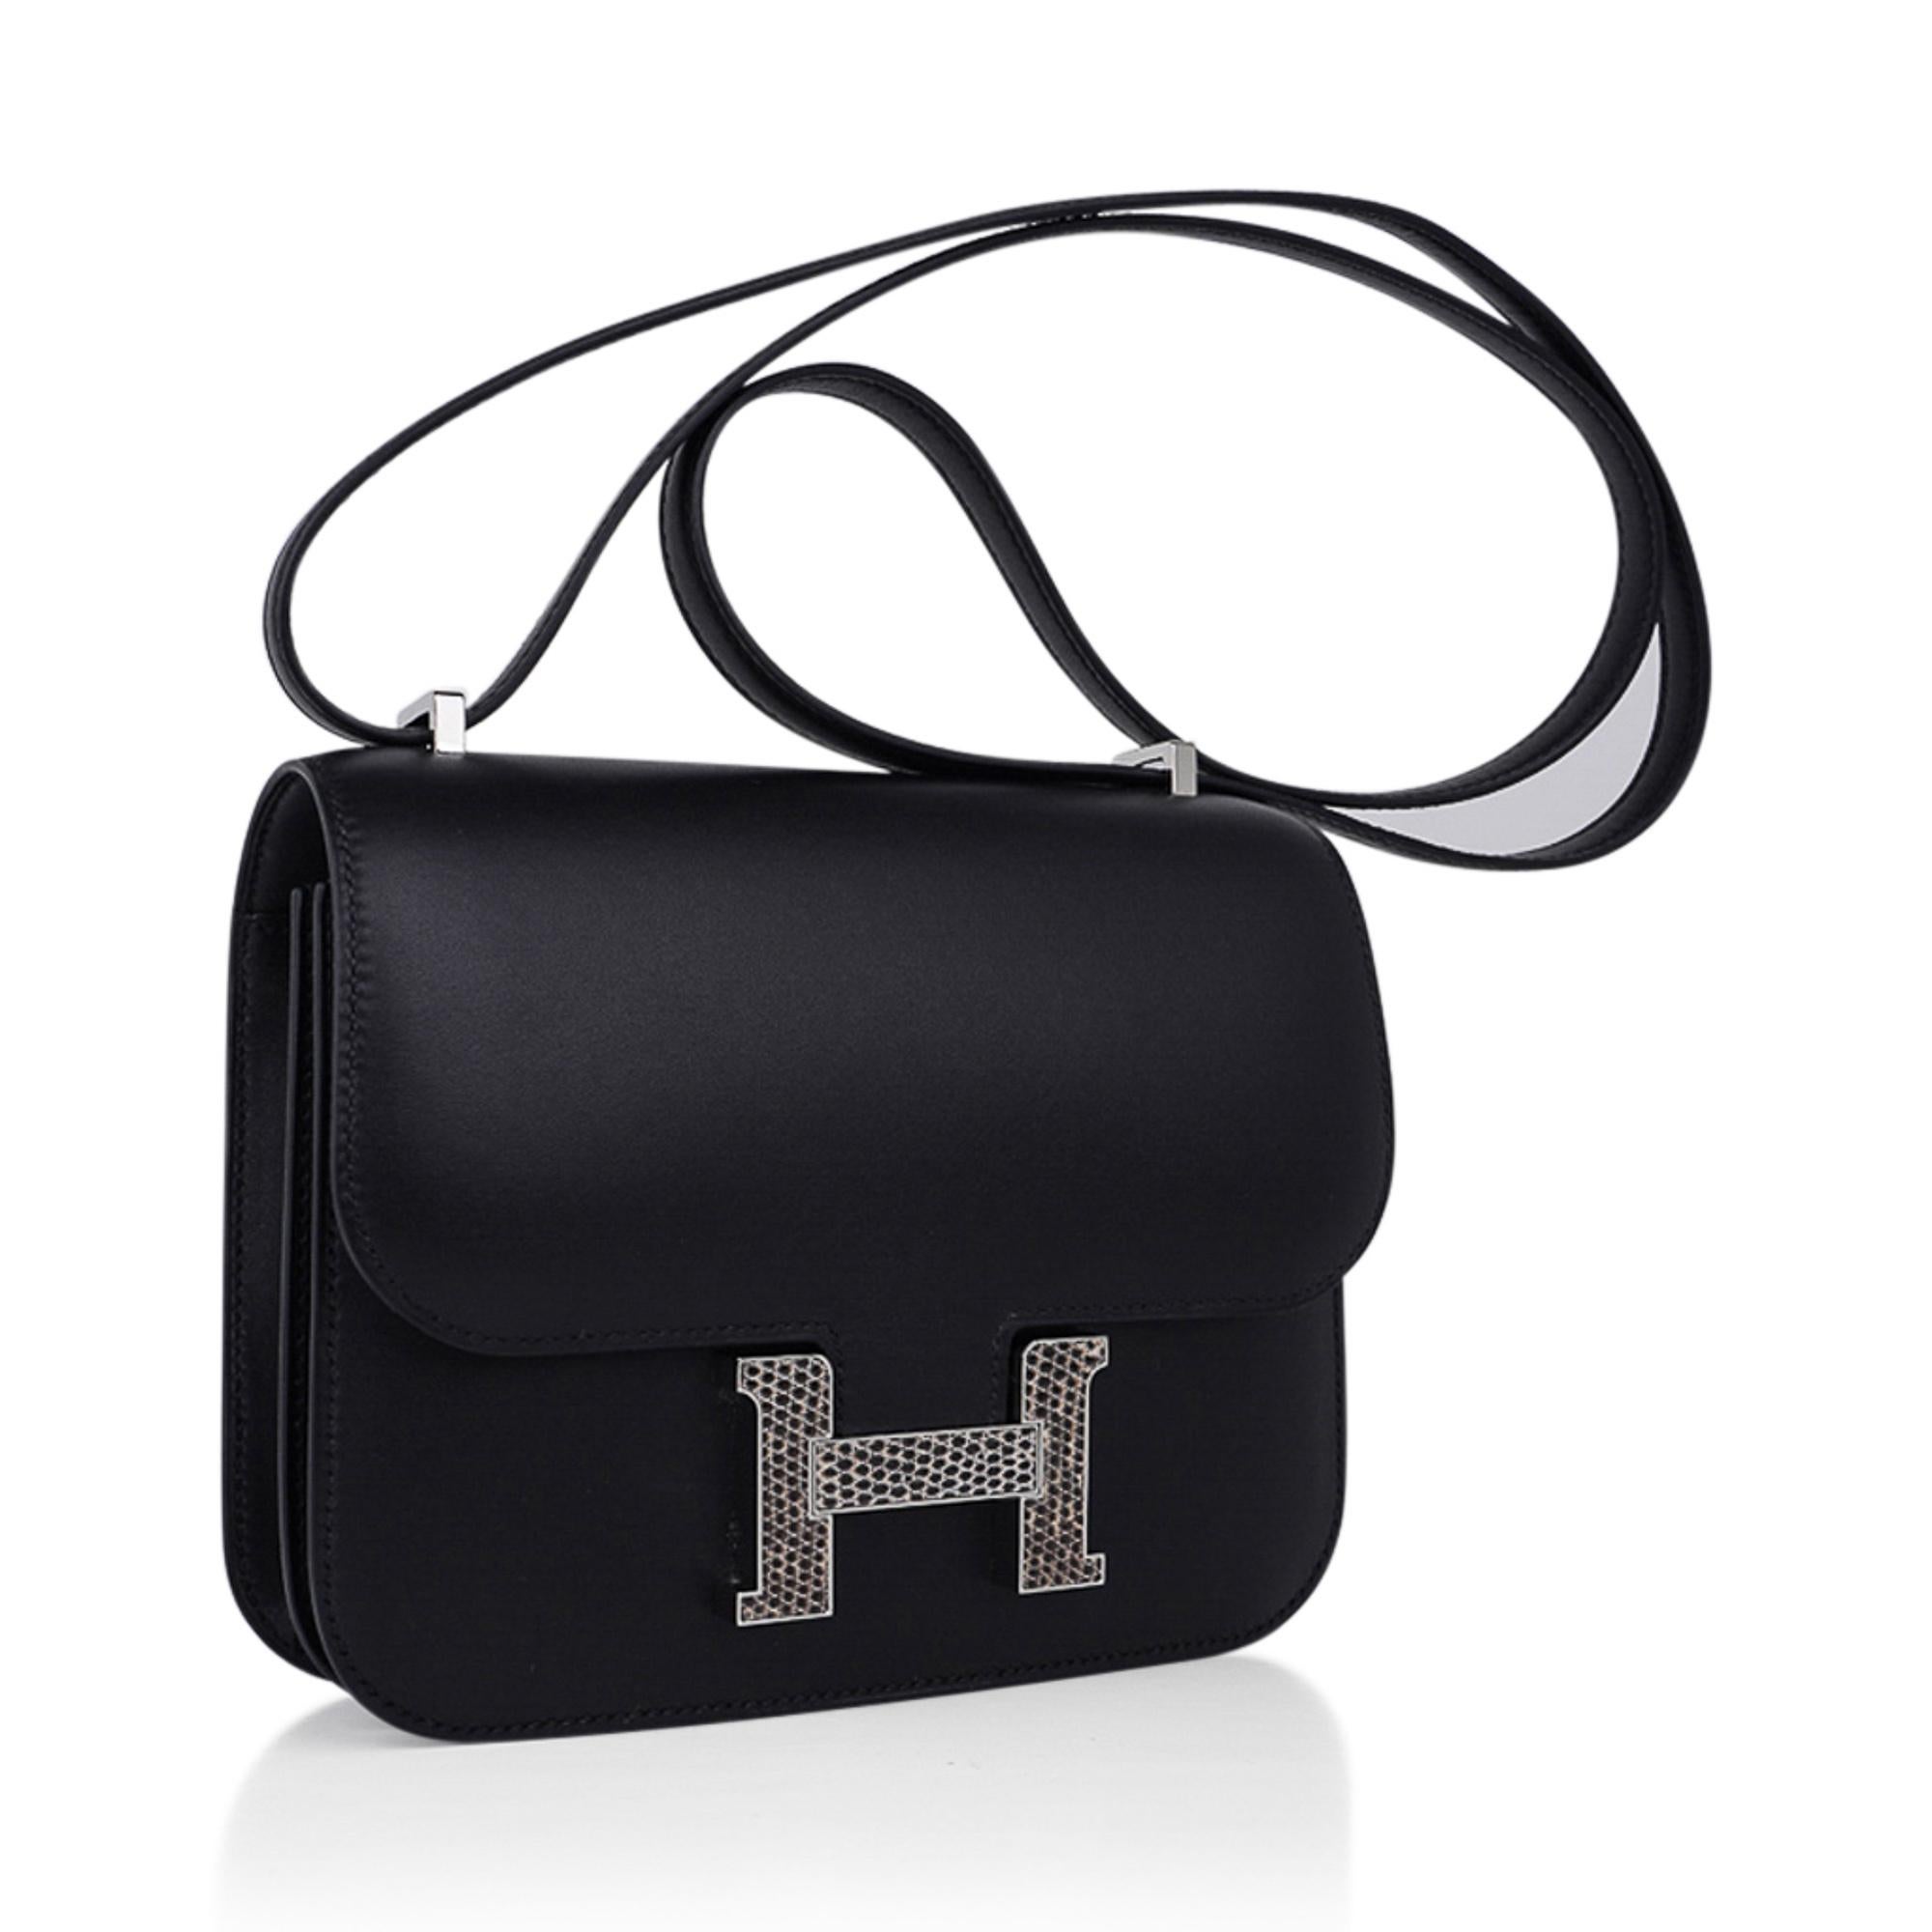 Hermes Constance 18 Black / Ombre Lizard Buckle Bag Madame Leather New 1